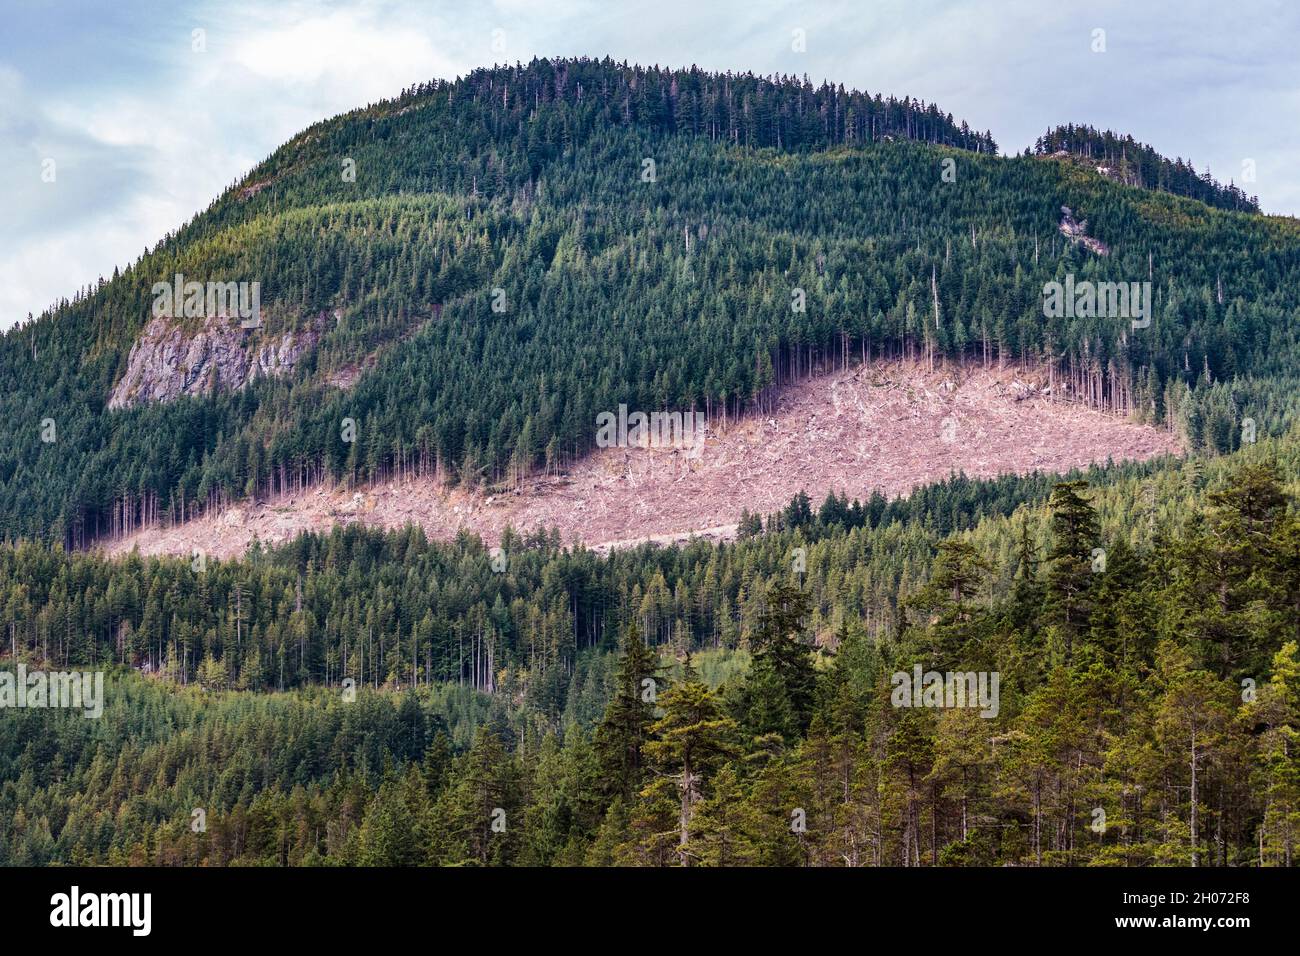 A patch of forest on a mountainside in coastal British Columbia has been clearcut, with a logging road just visible at the base of the logged area. Stock Photo